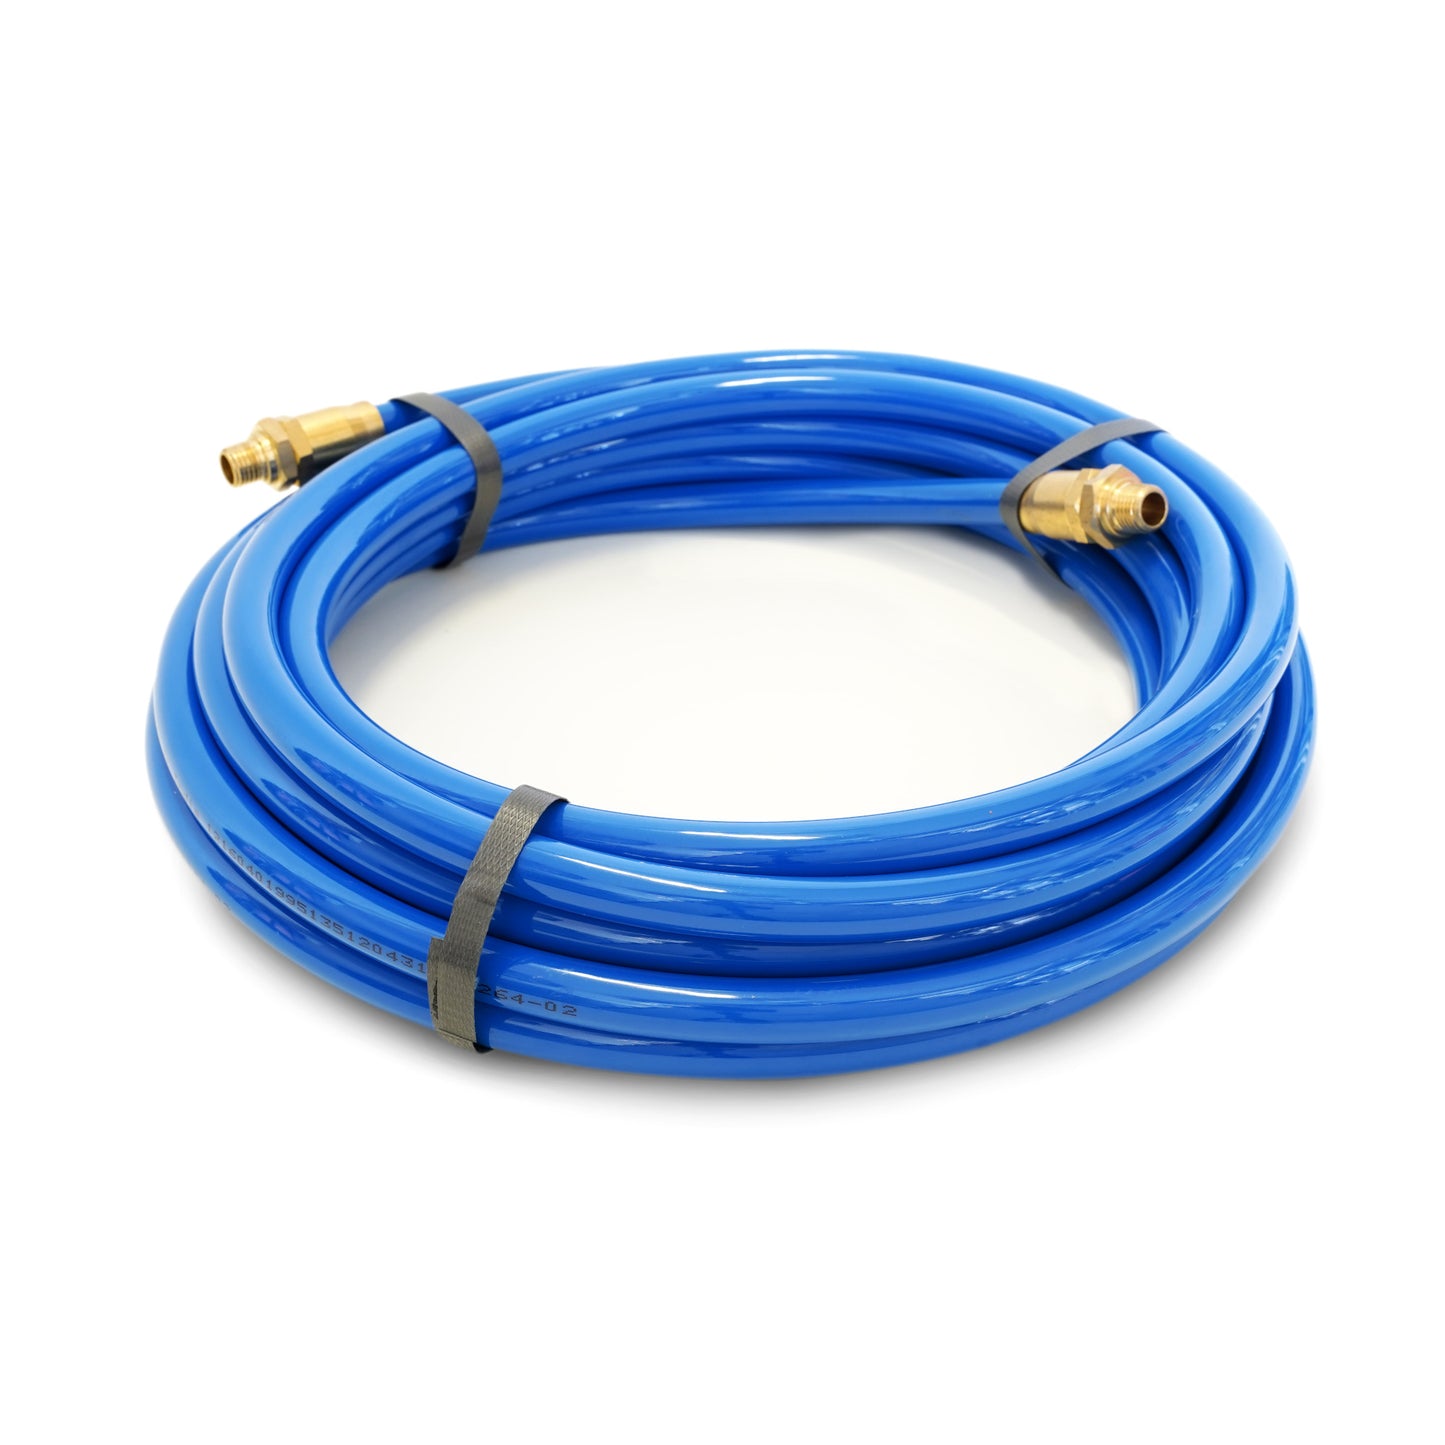 25-Foot 3/8-Inch ID Air Hose with Reuseable 1/4-Inch NPT Brass Fittings